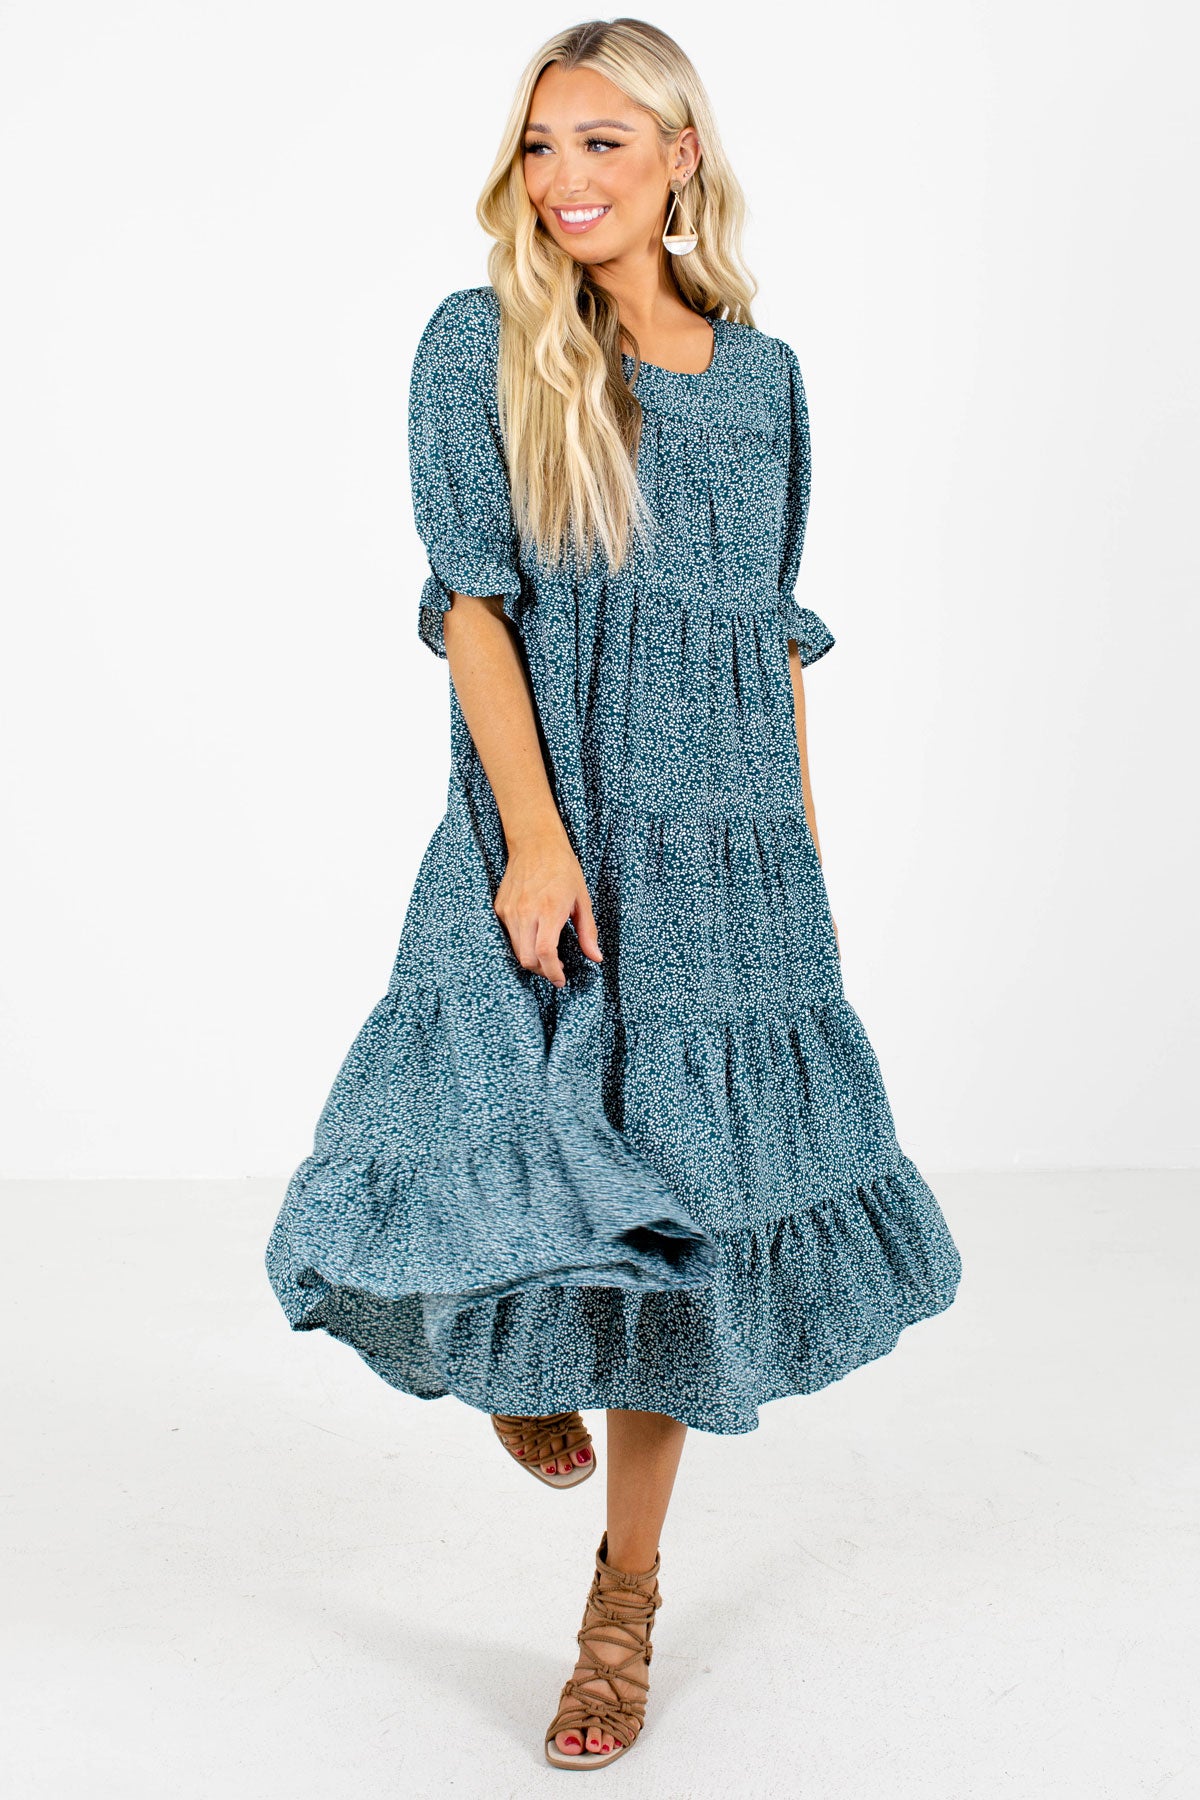 Teal Cute and Comfortable Boutique Midi Dresses for Women